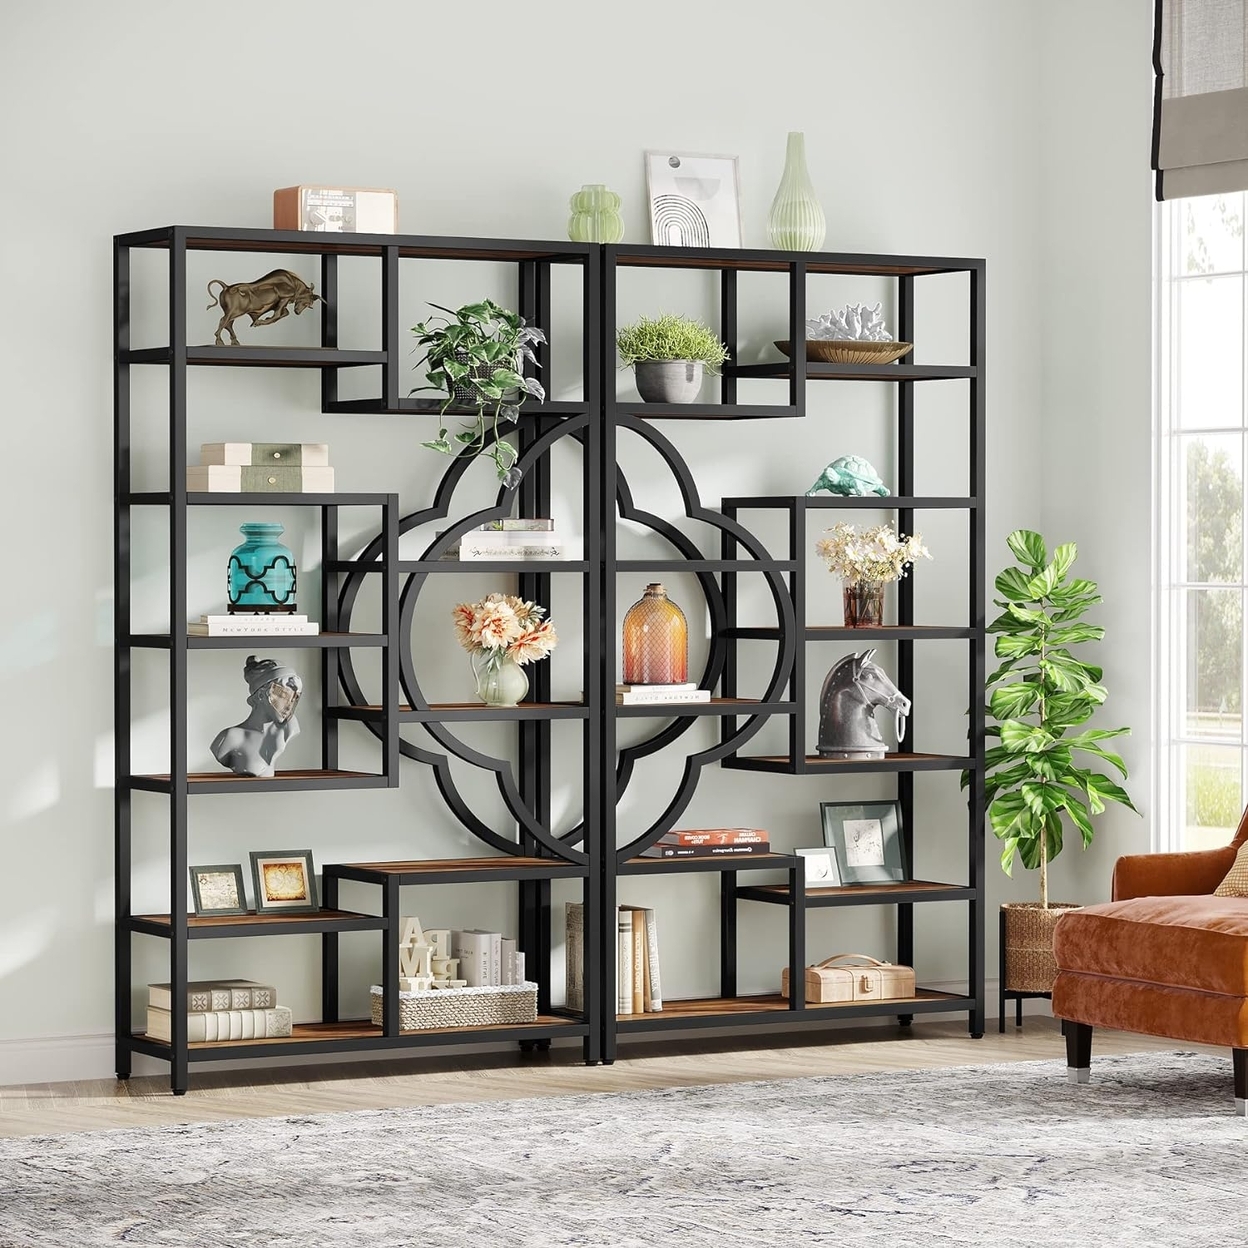 Tribesigns Bookshelf, 11-Shelves Tall Bookcase With Unique Arc-Shaped Design, Industrial Etagere Display Storage Shelves - 1pc